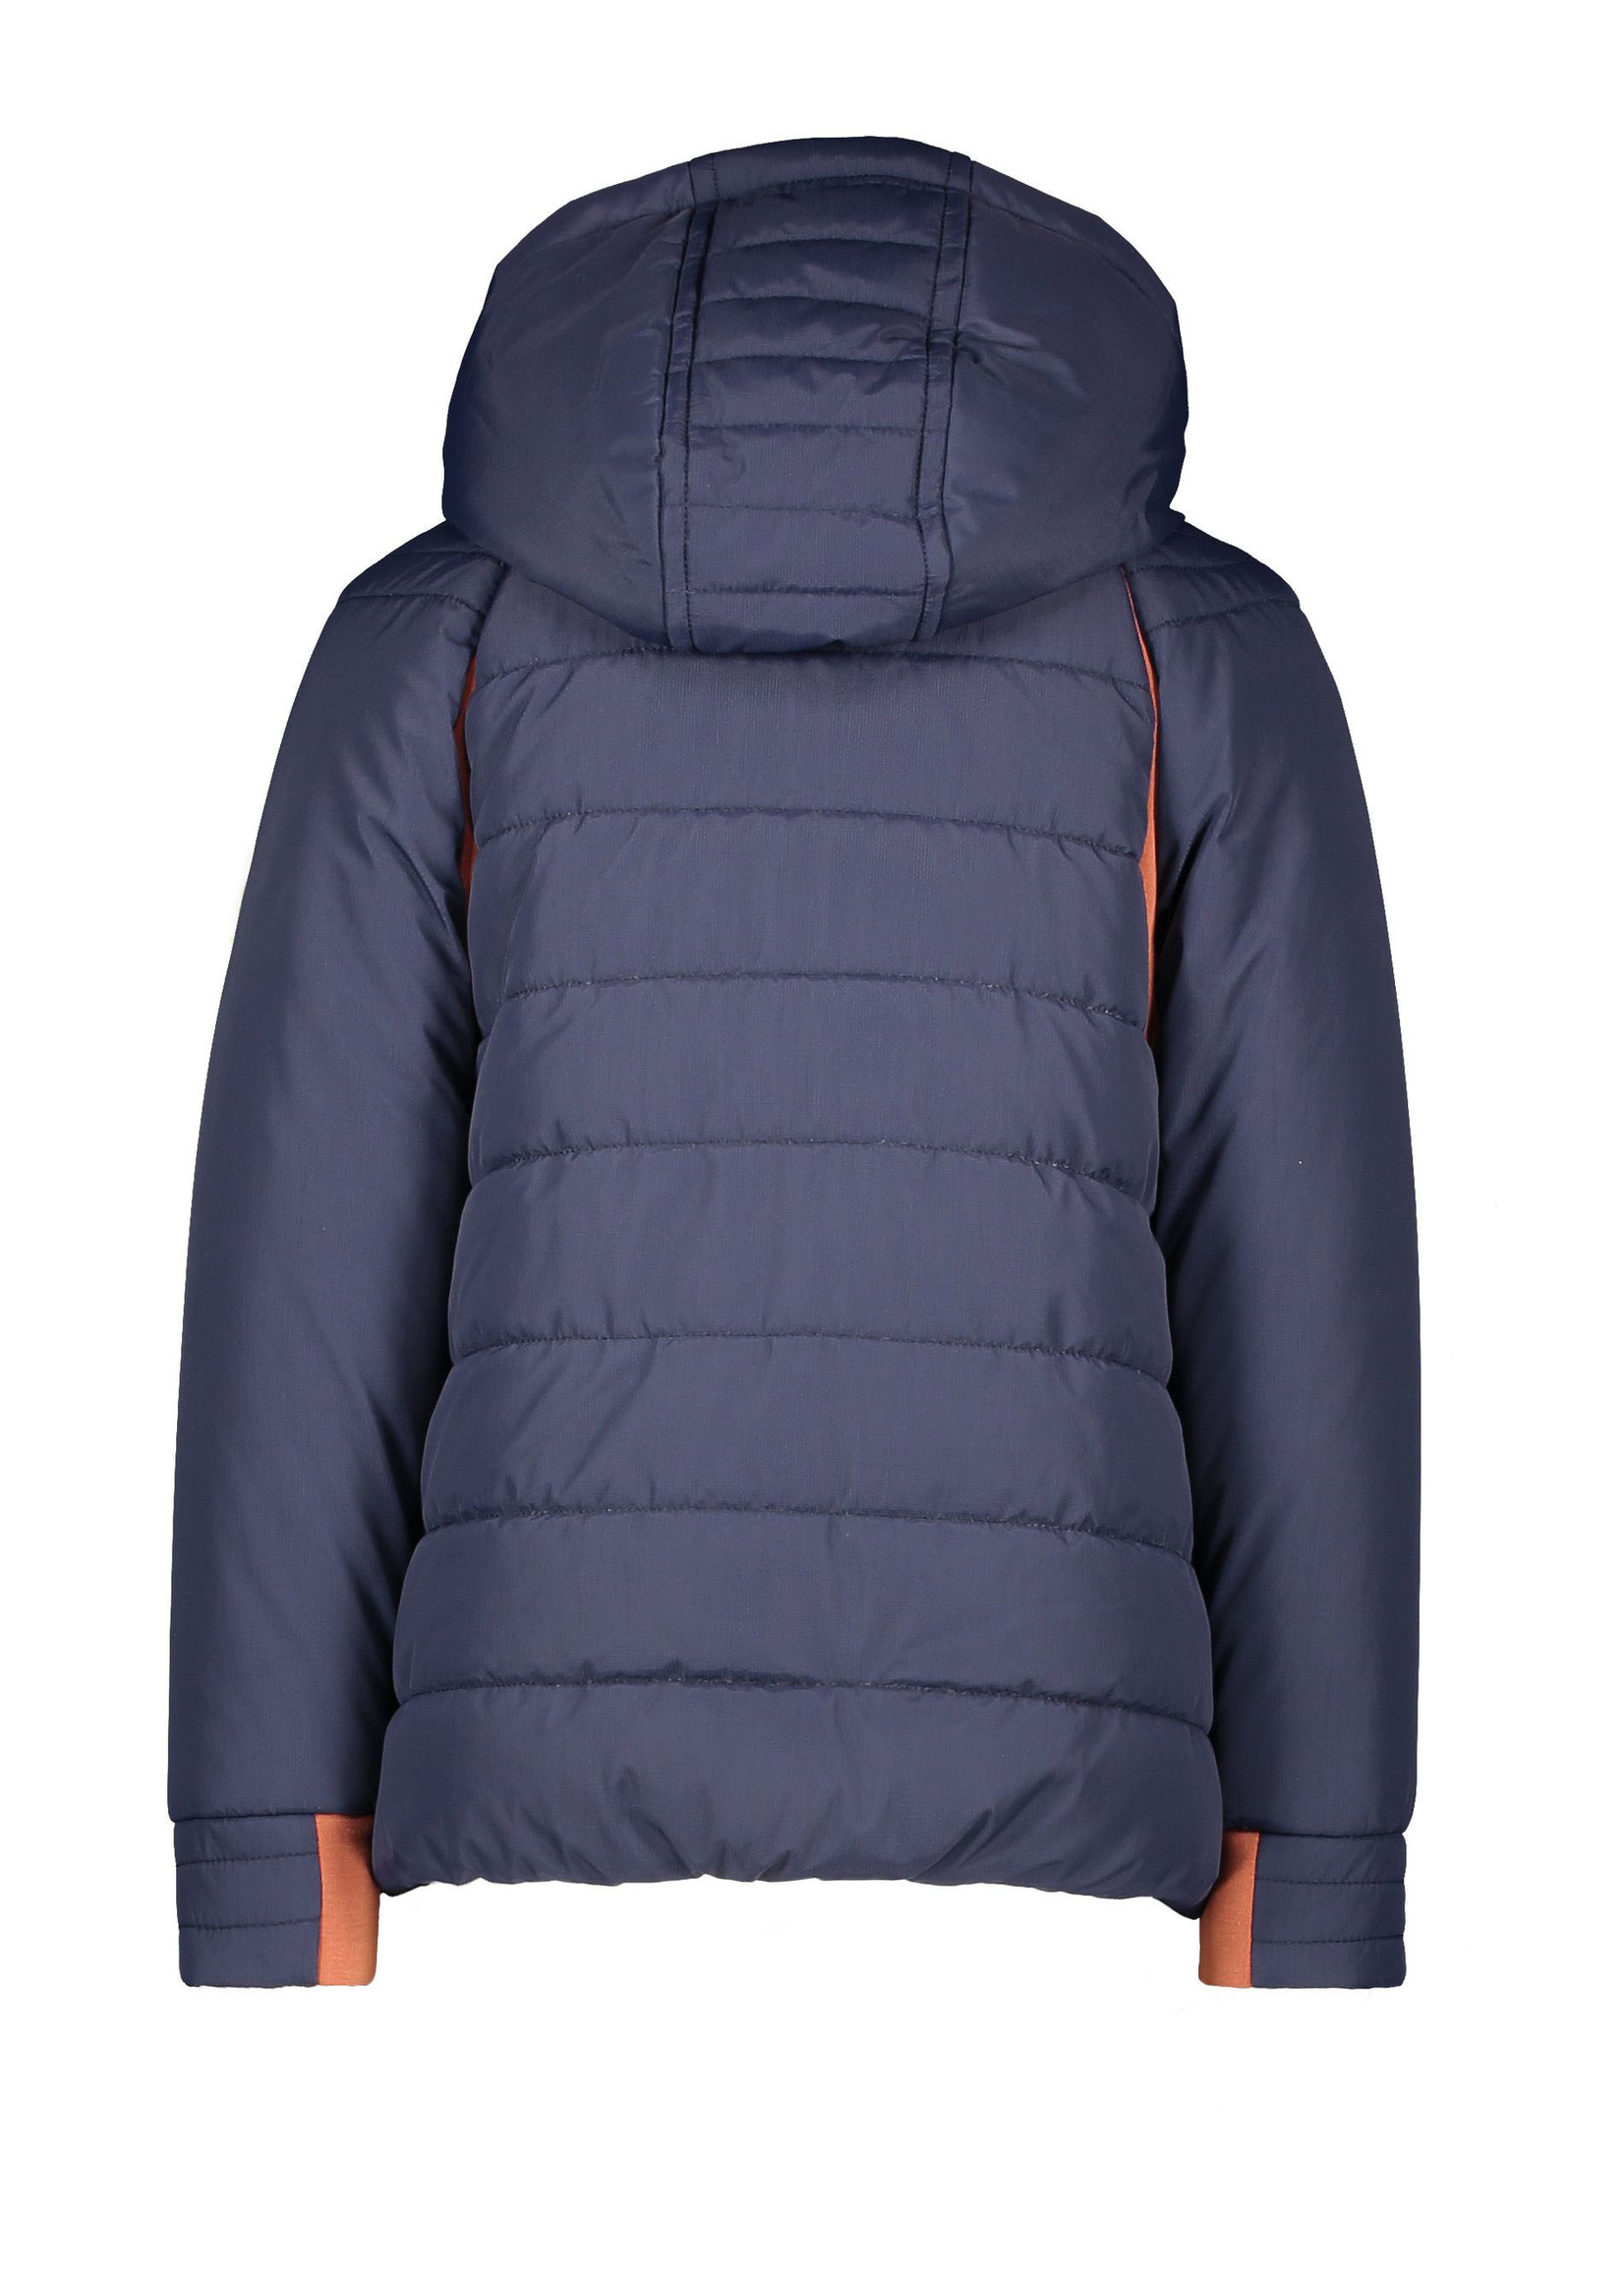 B-Nosy Boys ribstop jacket with contrast, Oxford blue